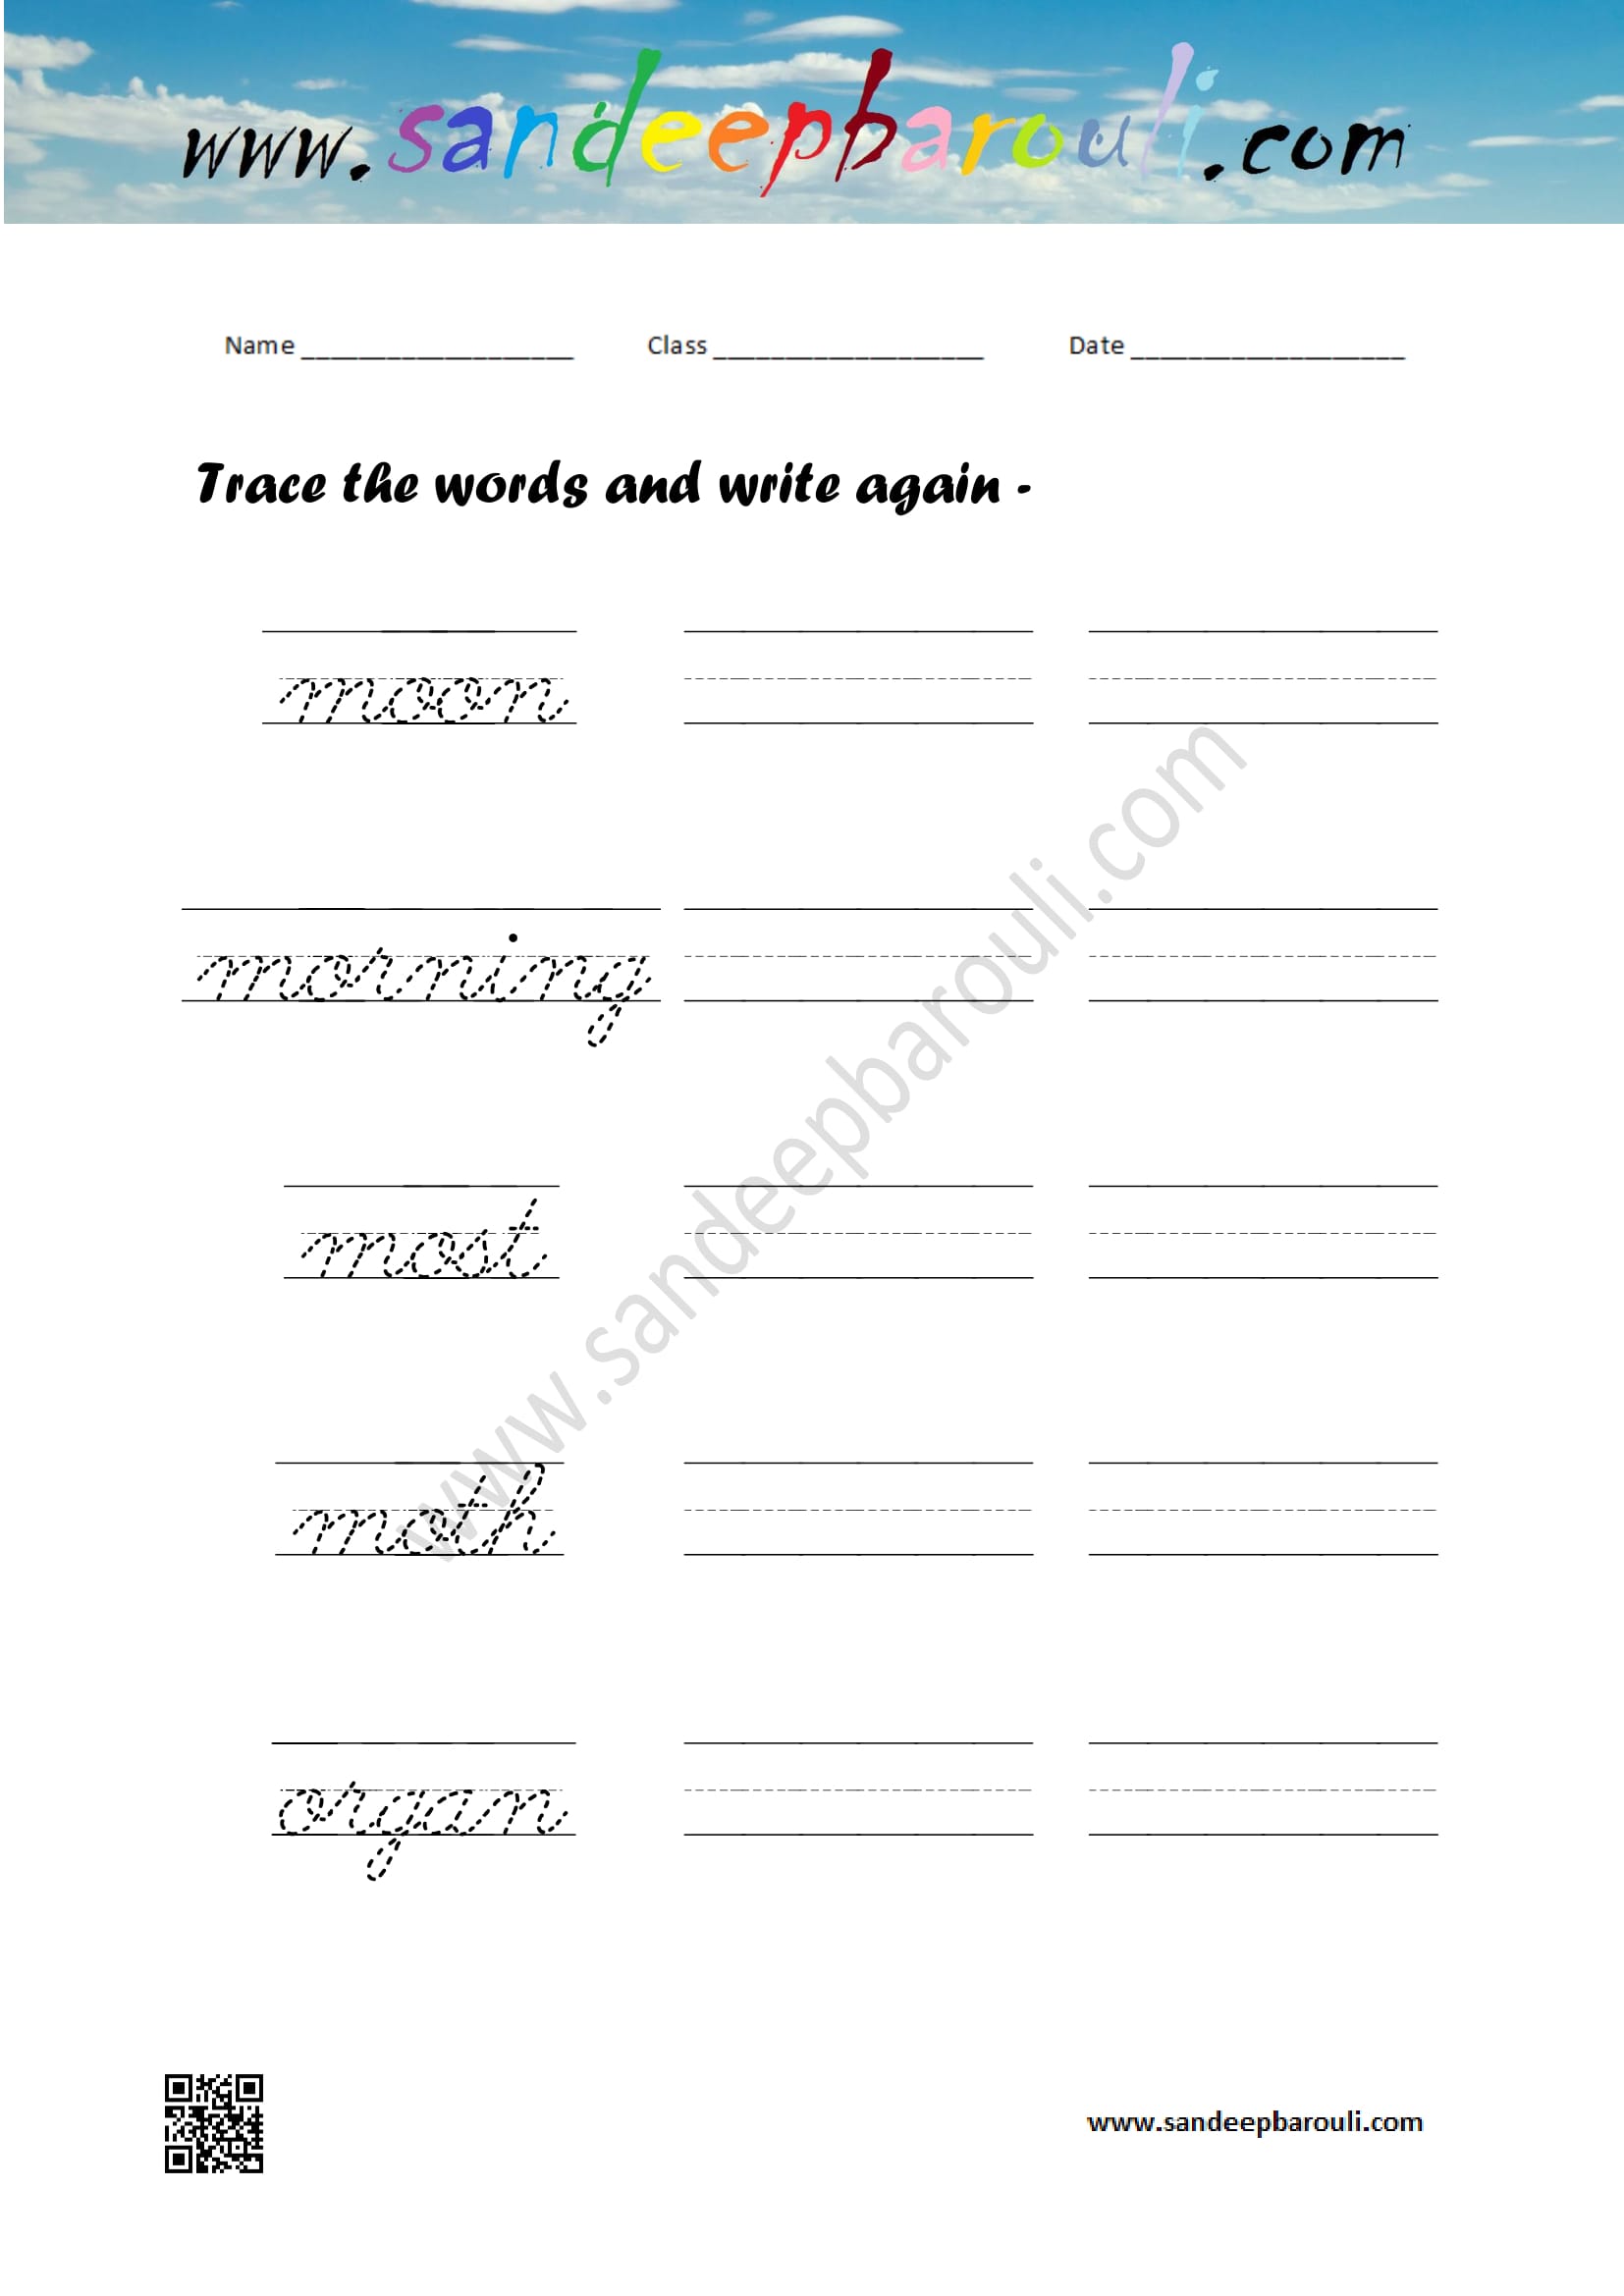 Cursive writing worksheet – trace the words and write again (101)